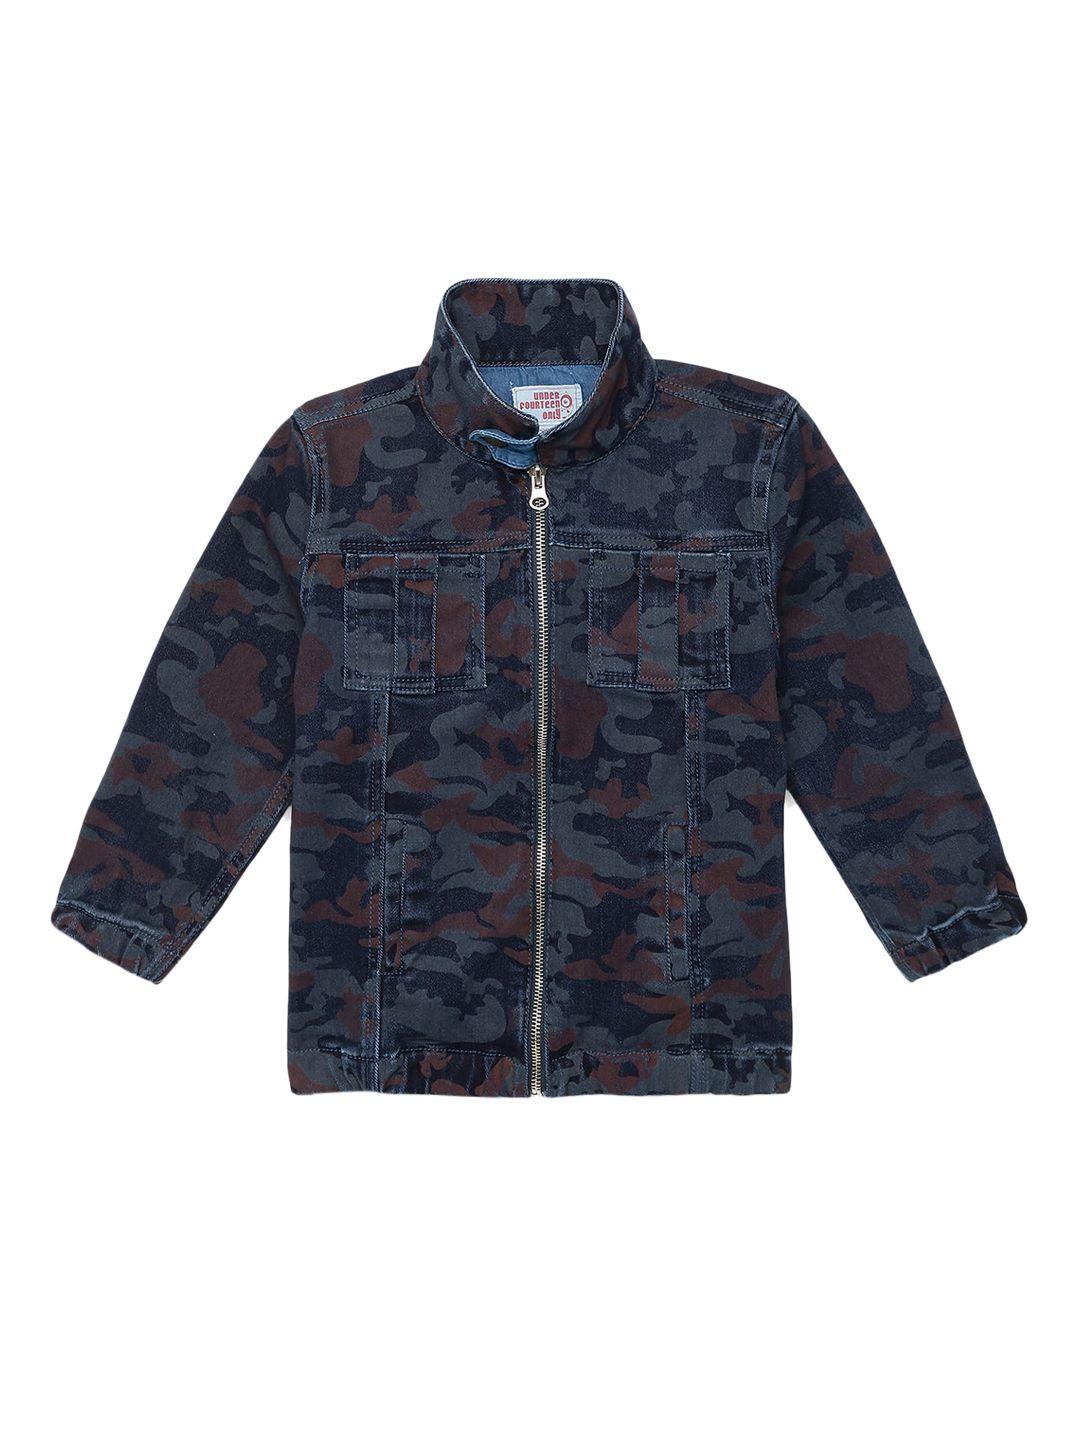 under fourteen only boys navy blue camouflage cotton tailored jacket